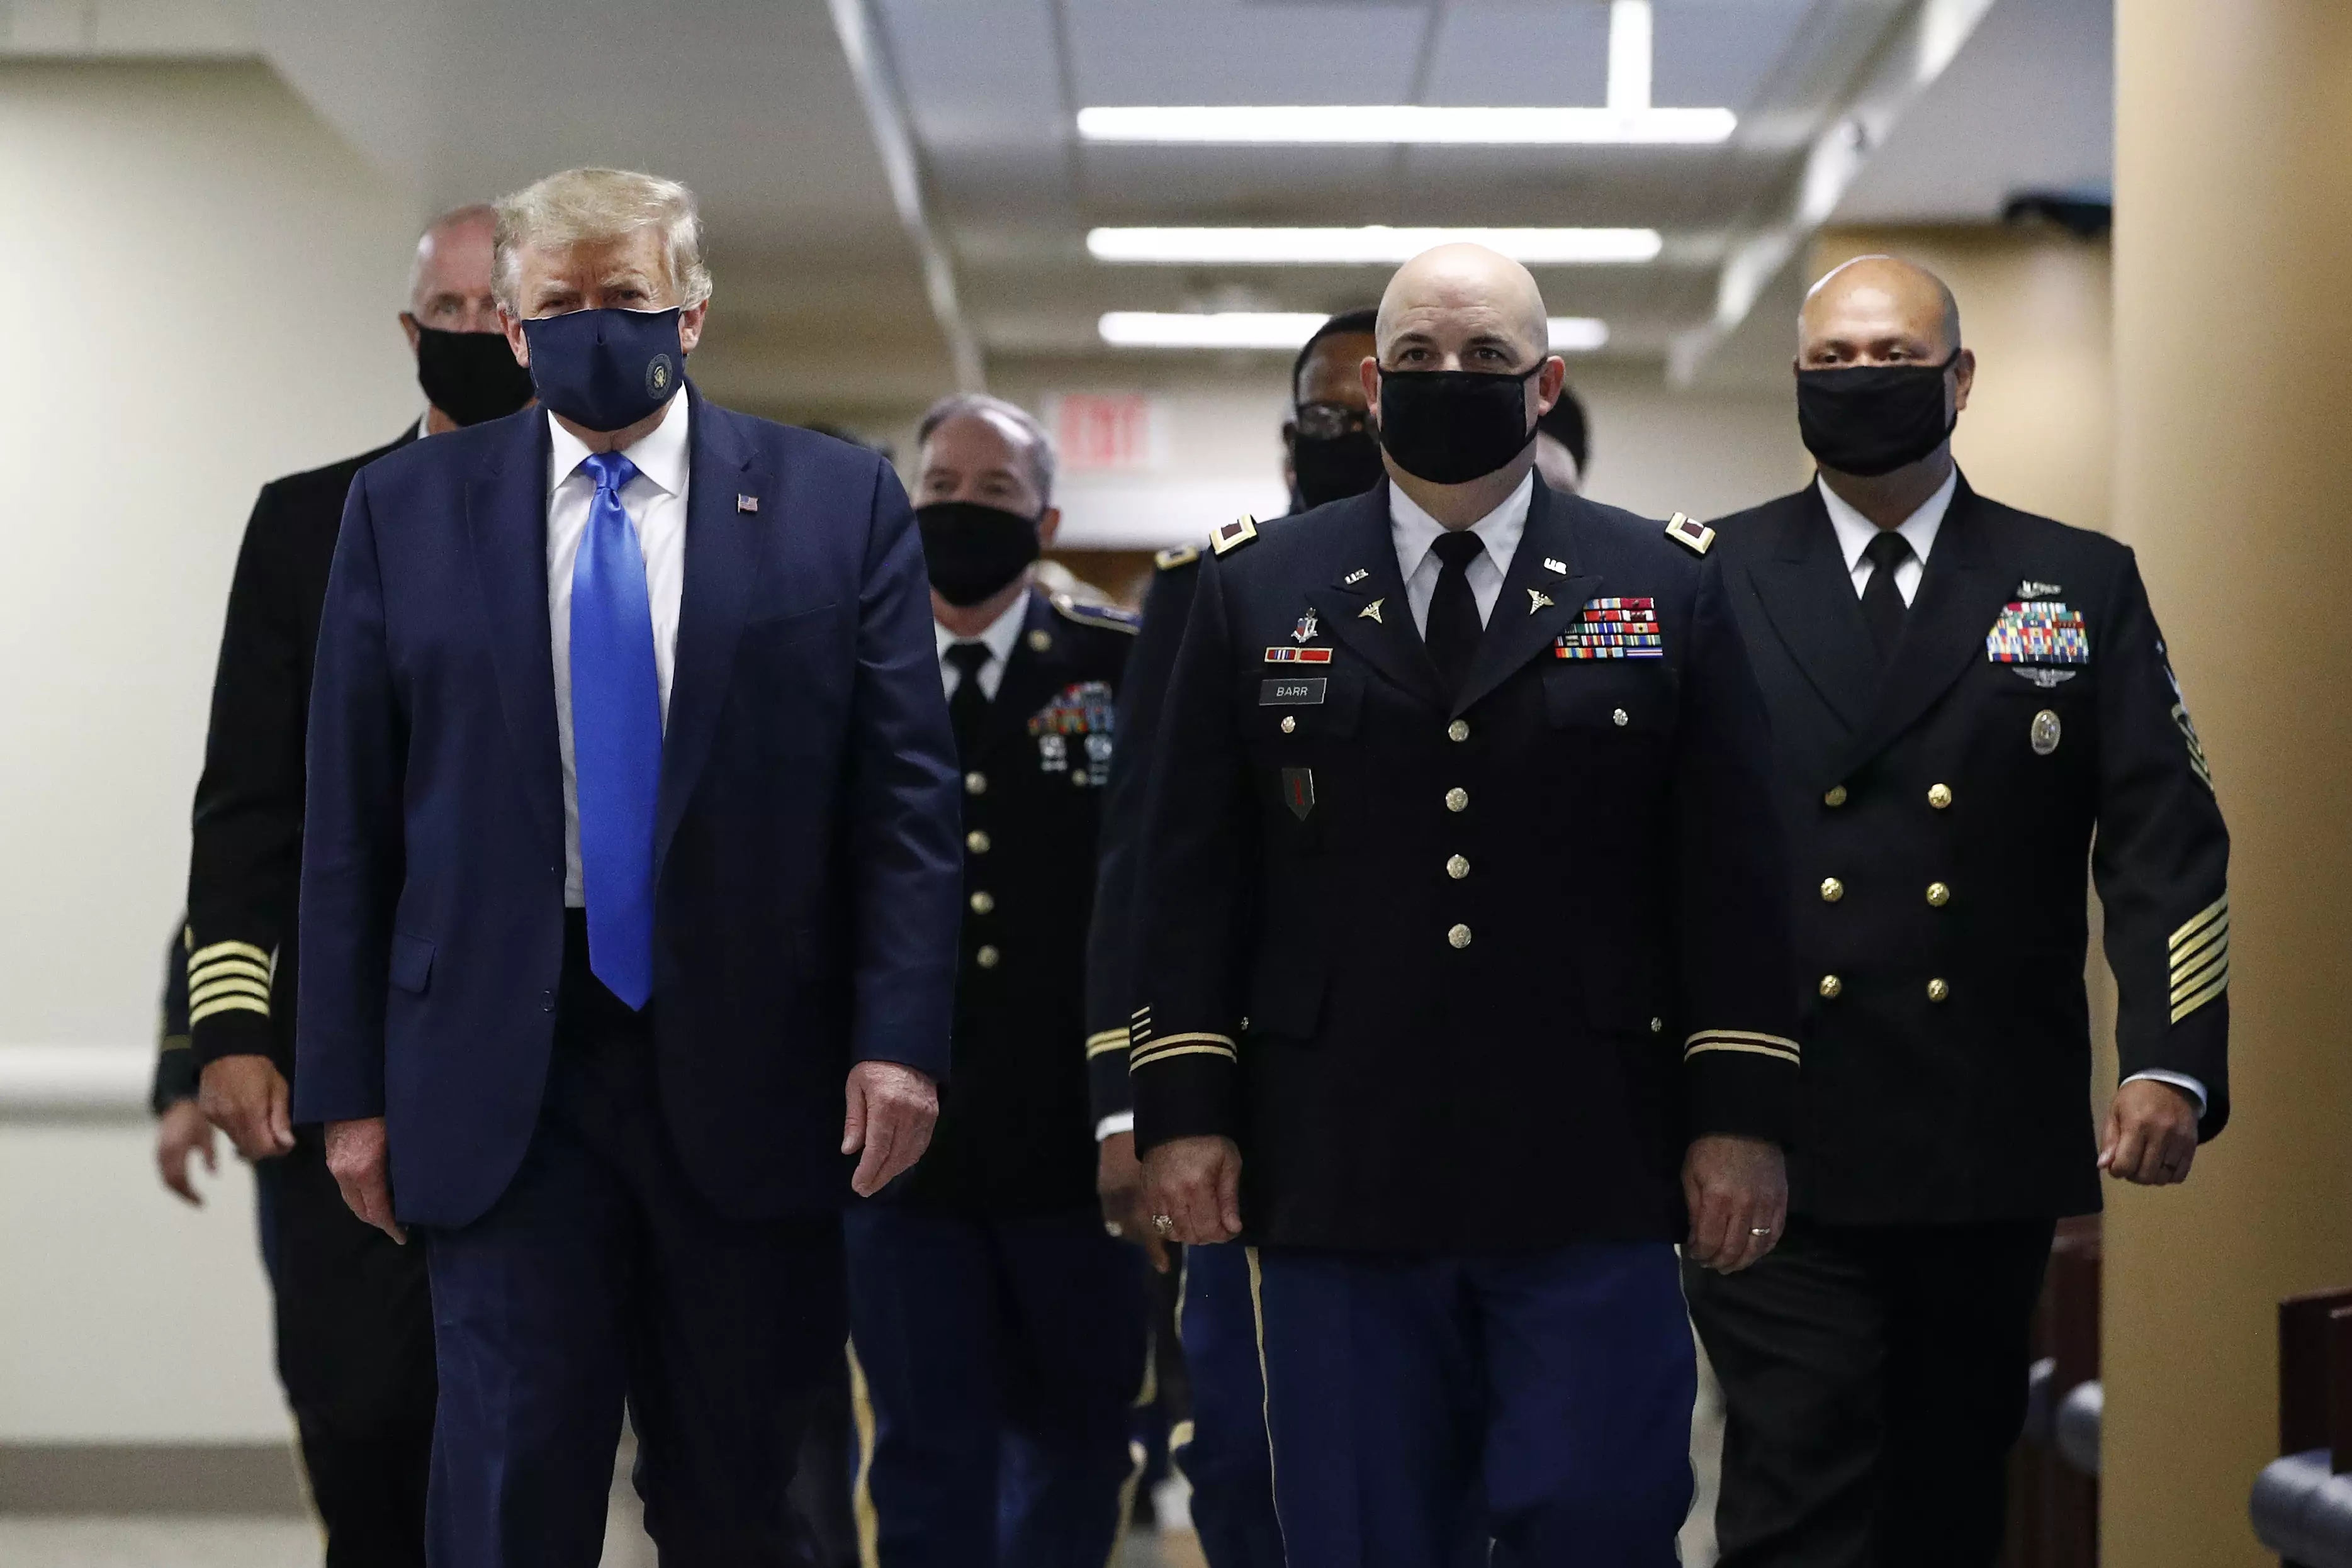 Donald Trump has finally worn a face mask in public.